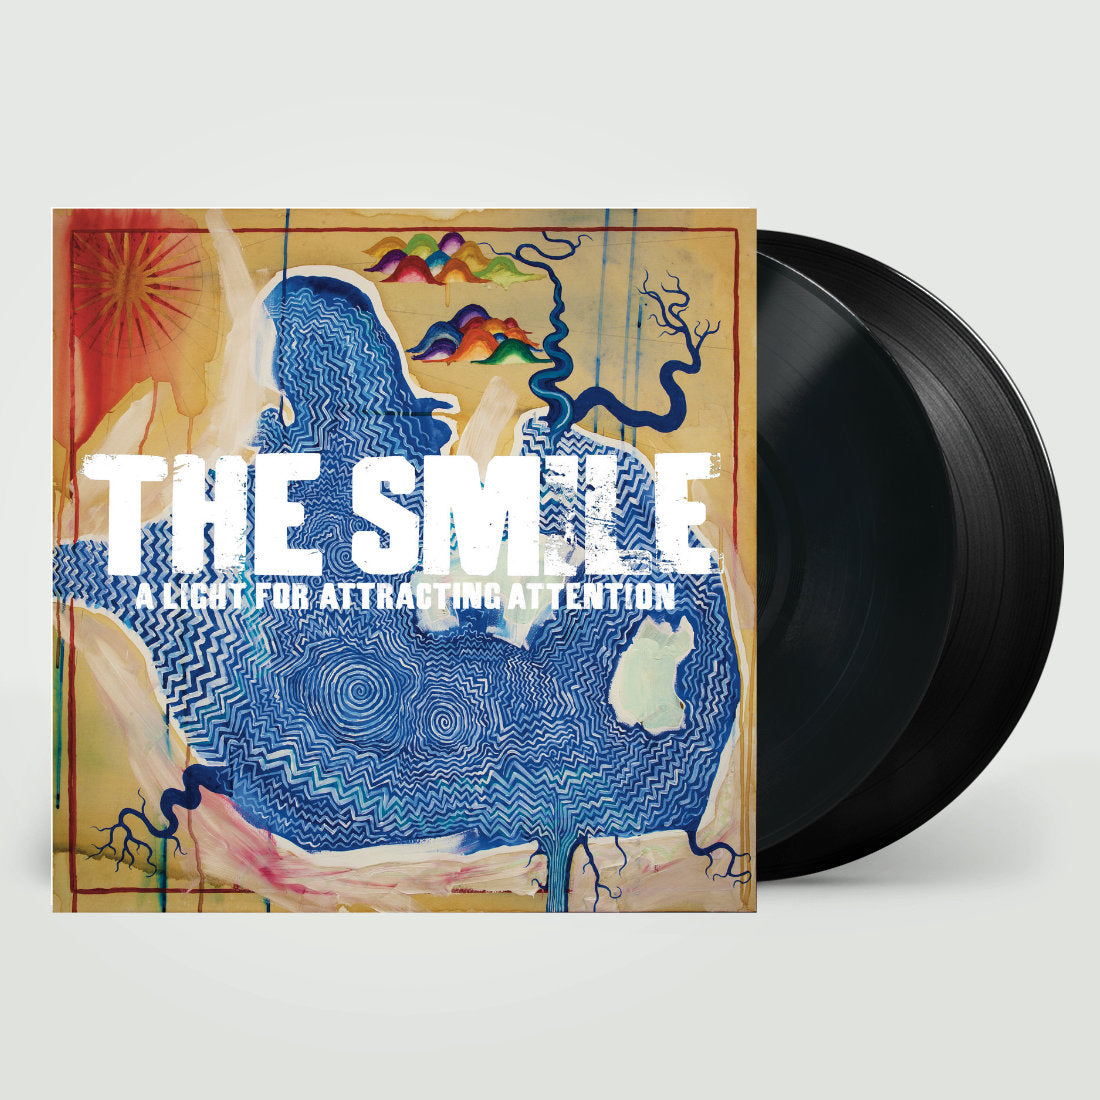 Smile - A Light For Attracting Attention (2 LPs)